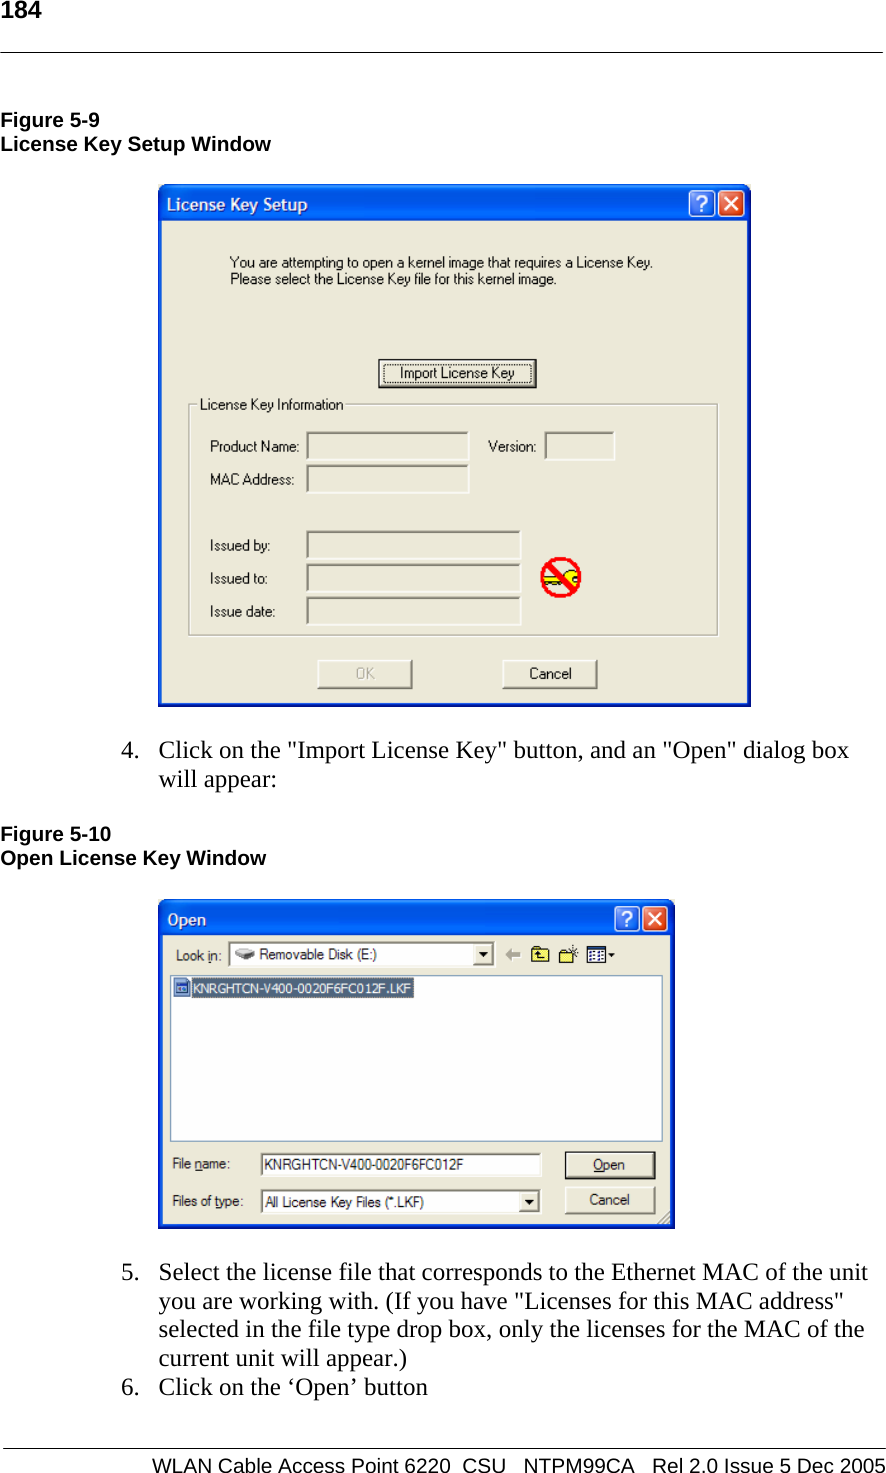   184    WLAN Cable Access Point 6220  CSU   NTPM99CA   Rel 2.0 Issue 5 Dec 2005 Figure 5-9 License Key Setup Window   4. Click on the &quot;Import License Key&quot; button, and an &quot;Open&quot; dialog box will appear: Figure 5-10 Open License Key Window  5. Select the license file that corresponds to the Ethernet MAC of the unit you are working with. (If you have &quot;Licenses for this MAC address&quot; selected in the file type drop box, only the licenses for the MAC of the current unit will appear.) 6. Click on the ‘Open’ button 